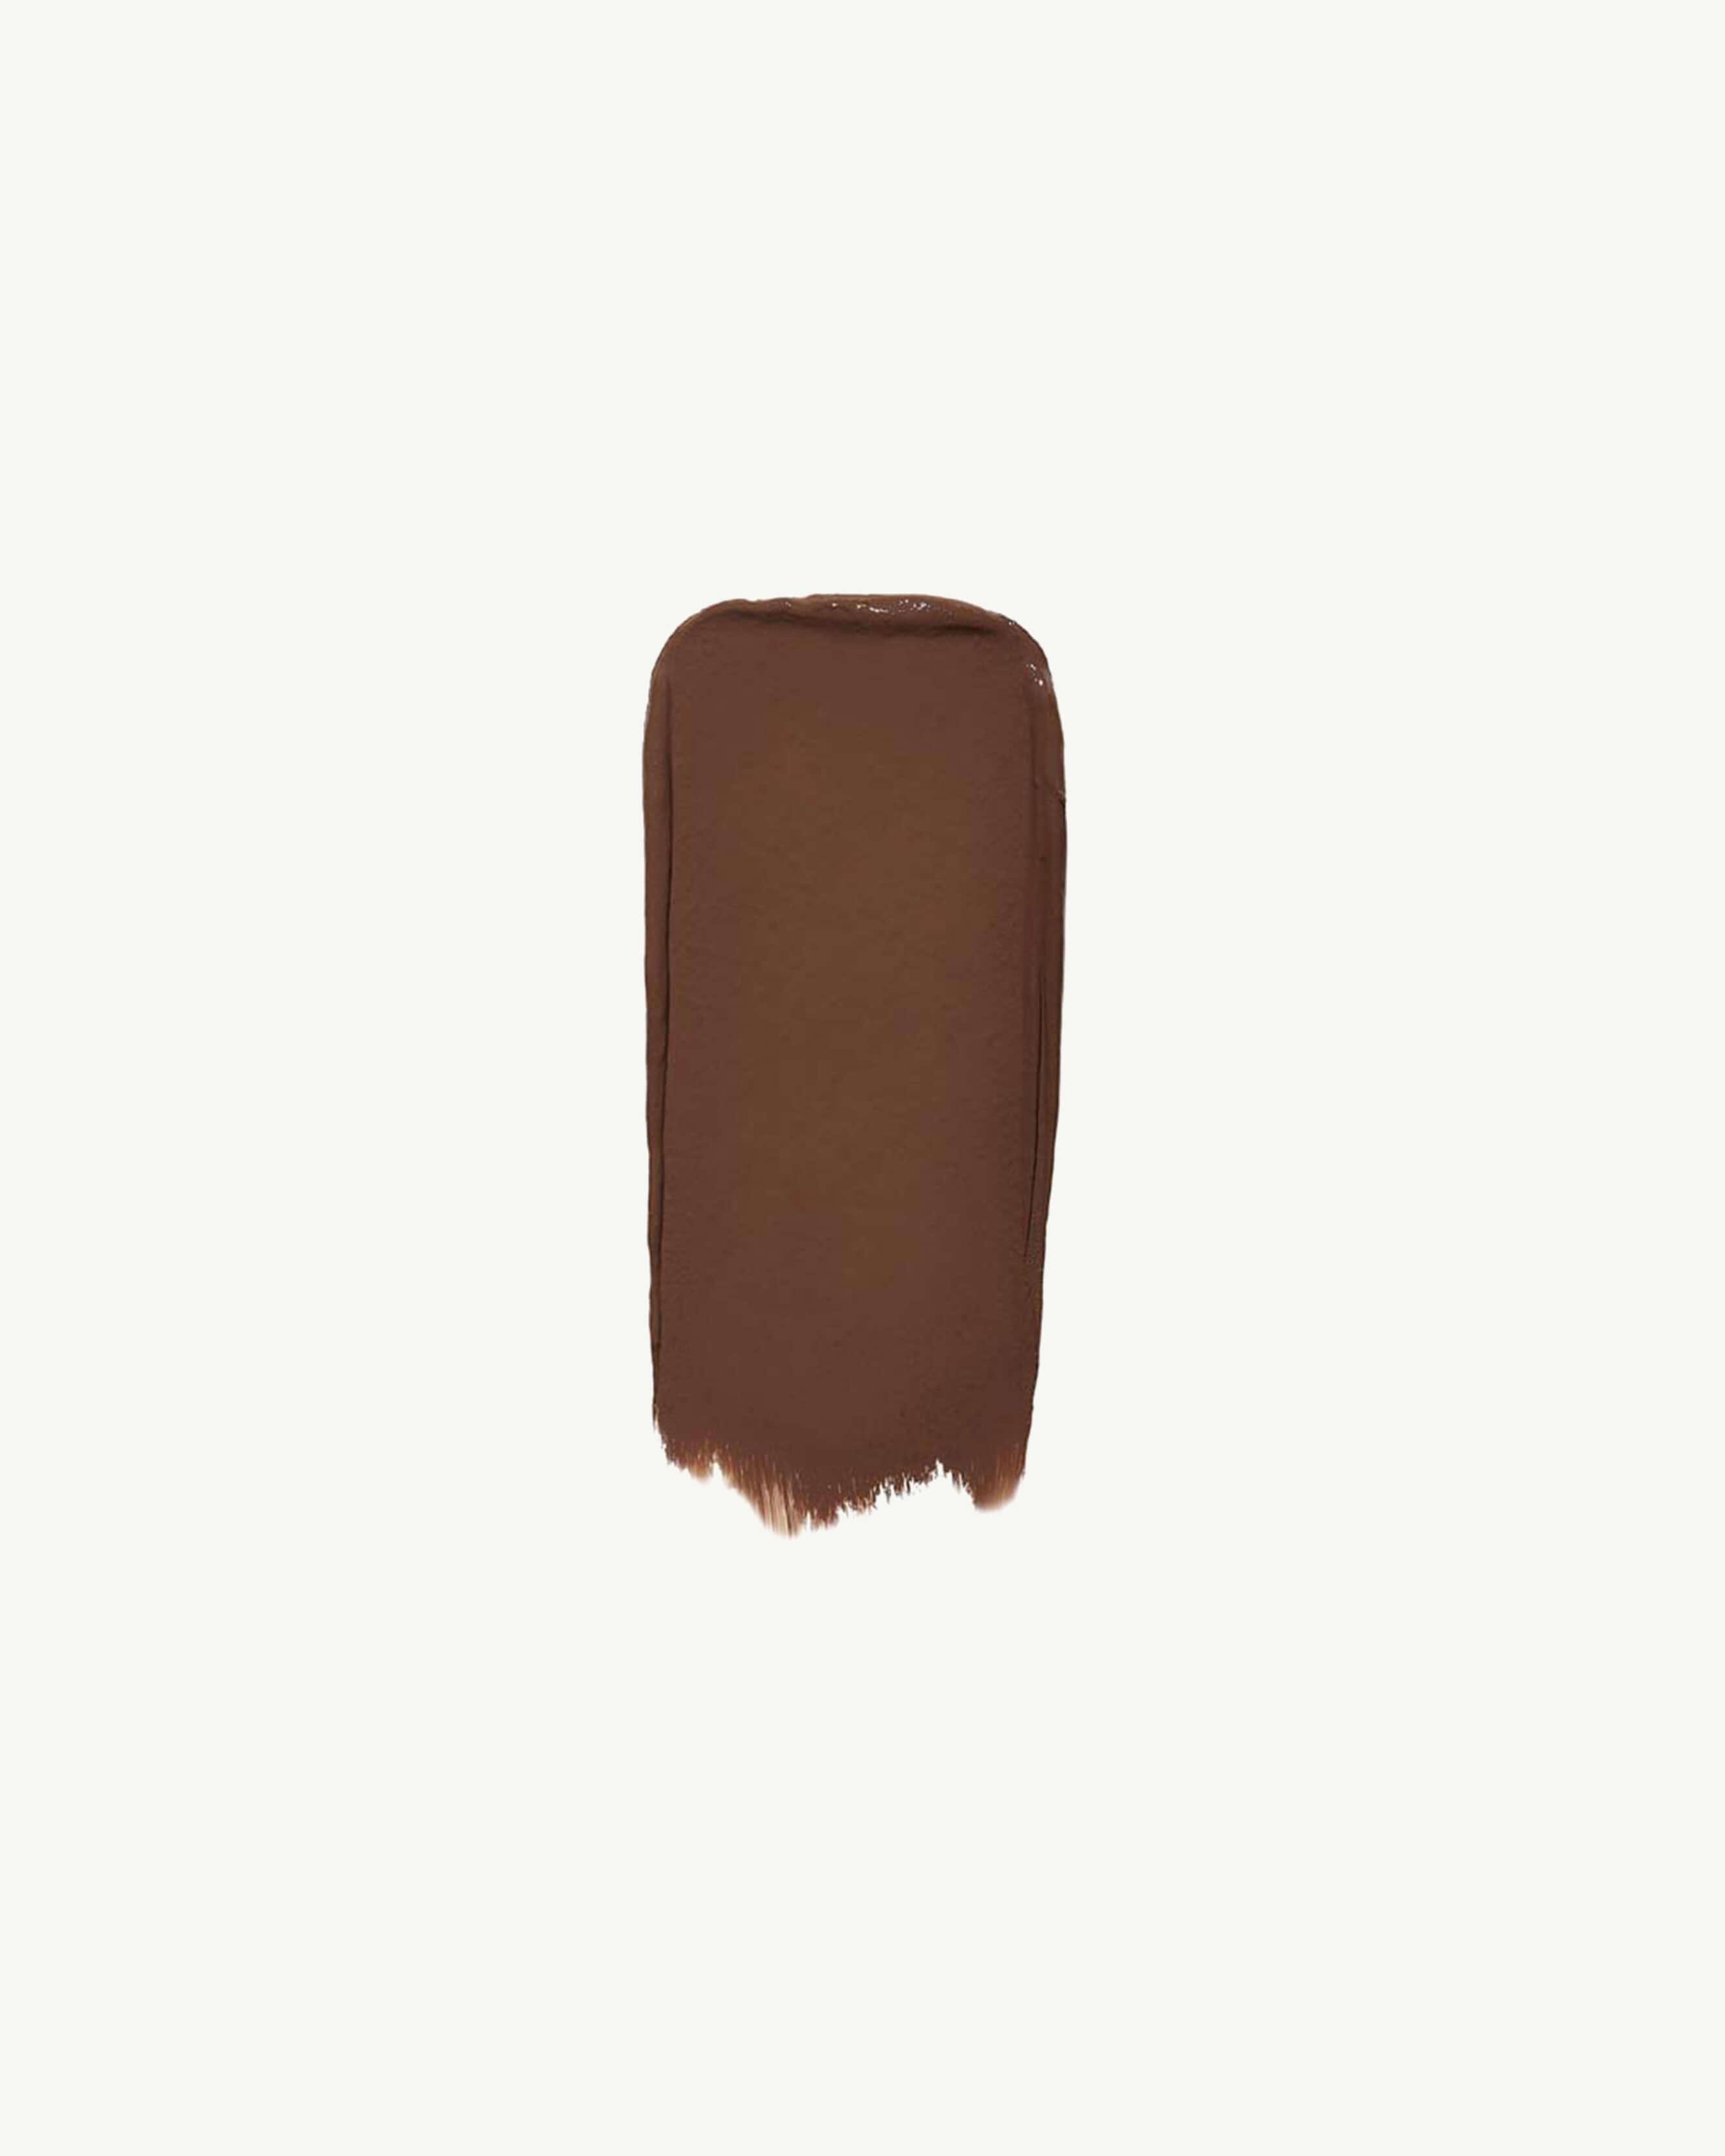 Shade 122 (for deep skin with cool undertones)